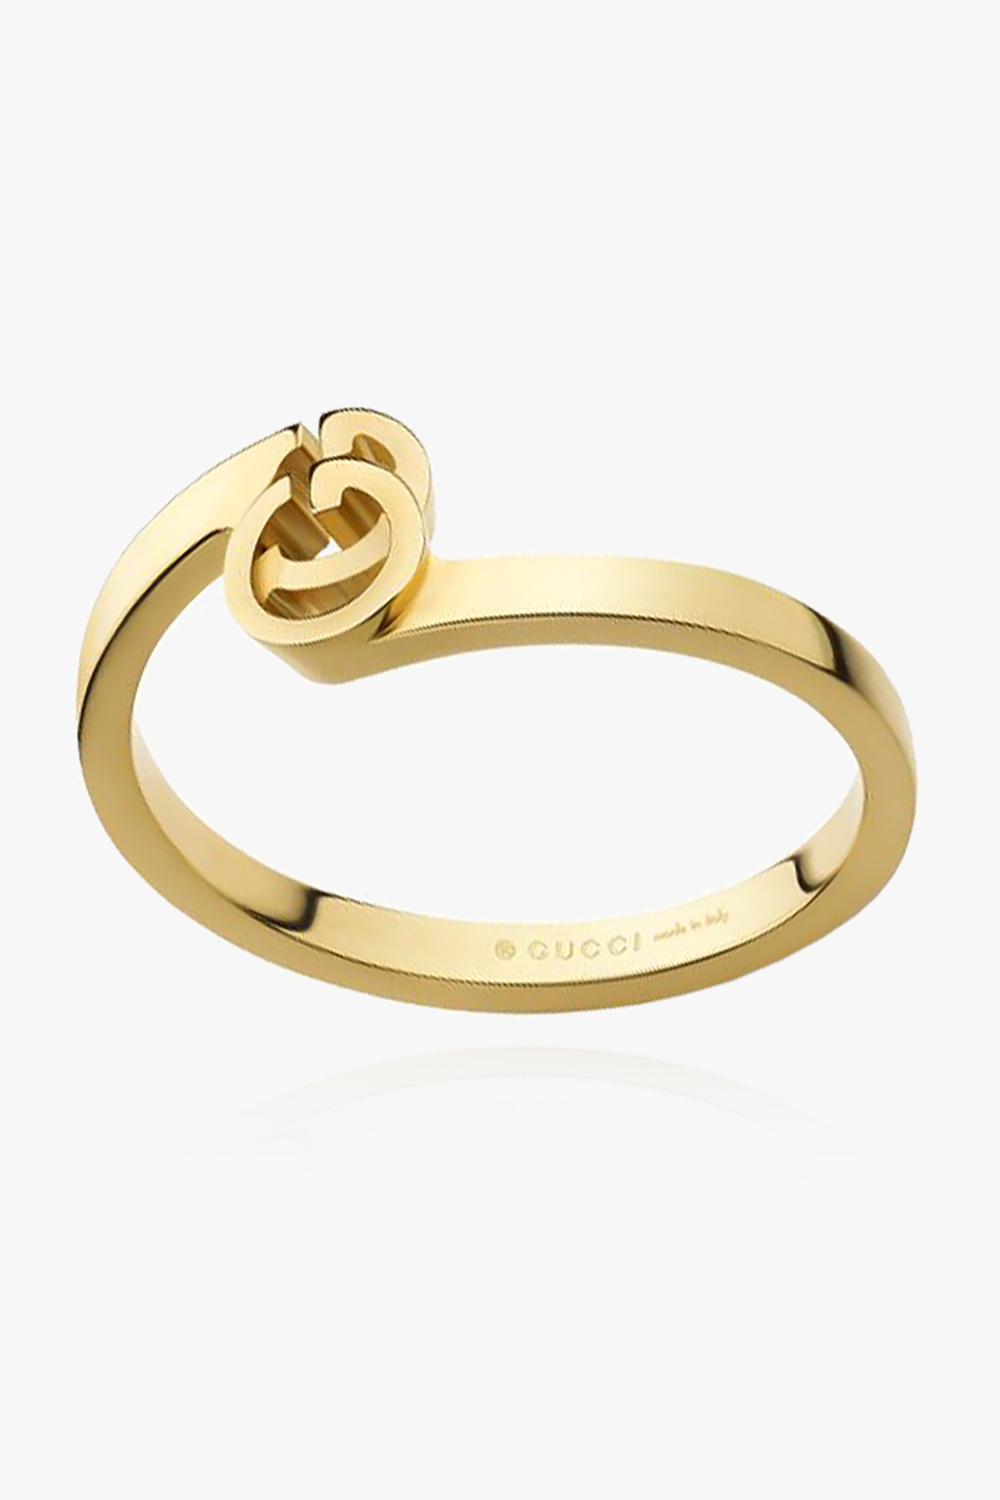 gucci Wolle Yellow gold ring